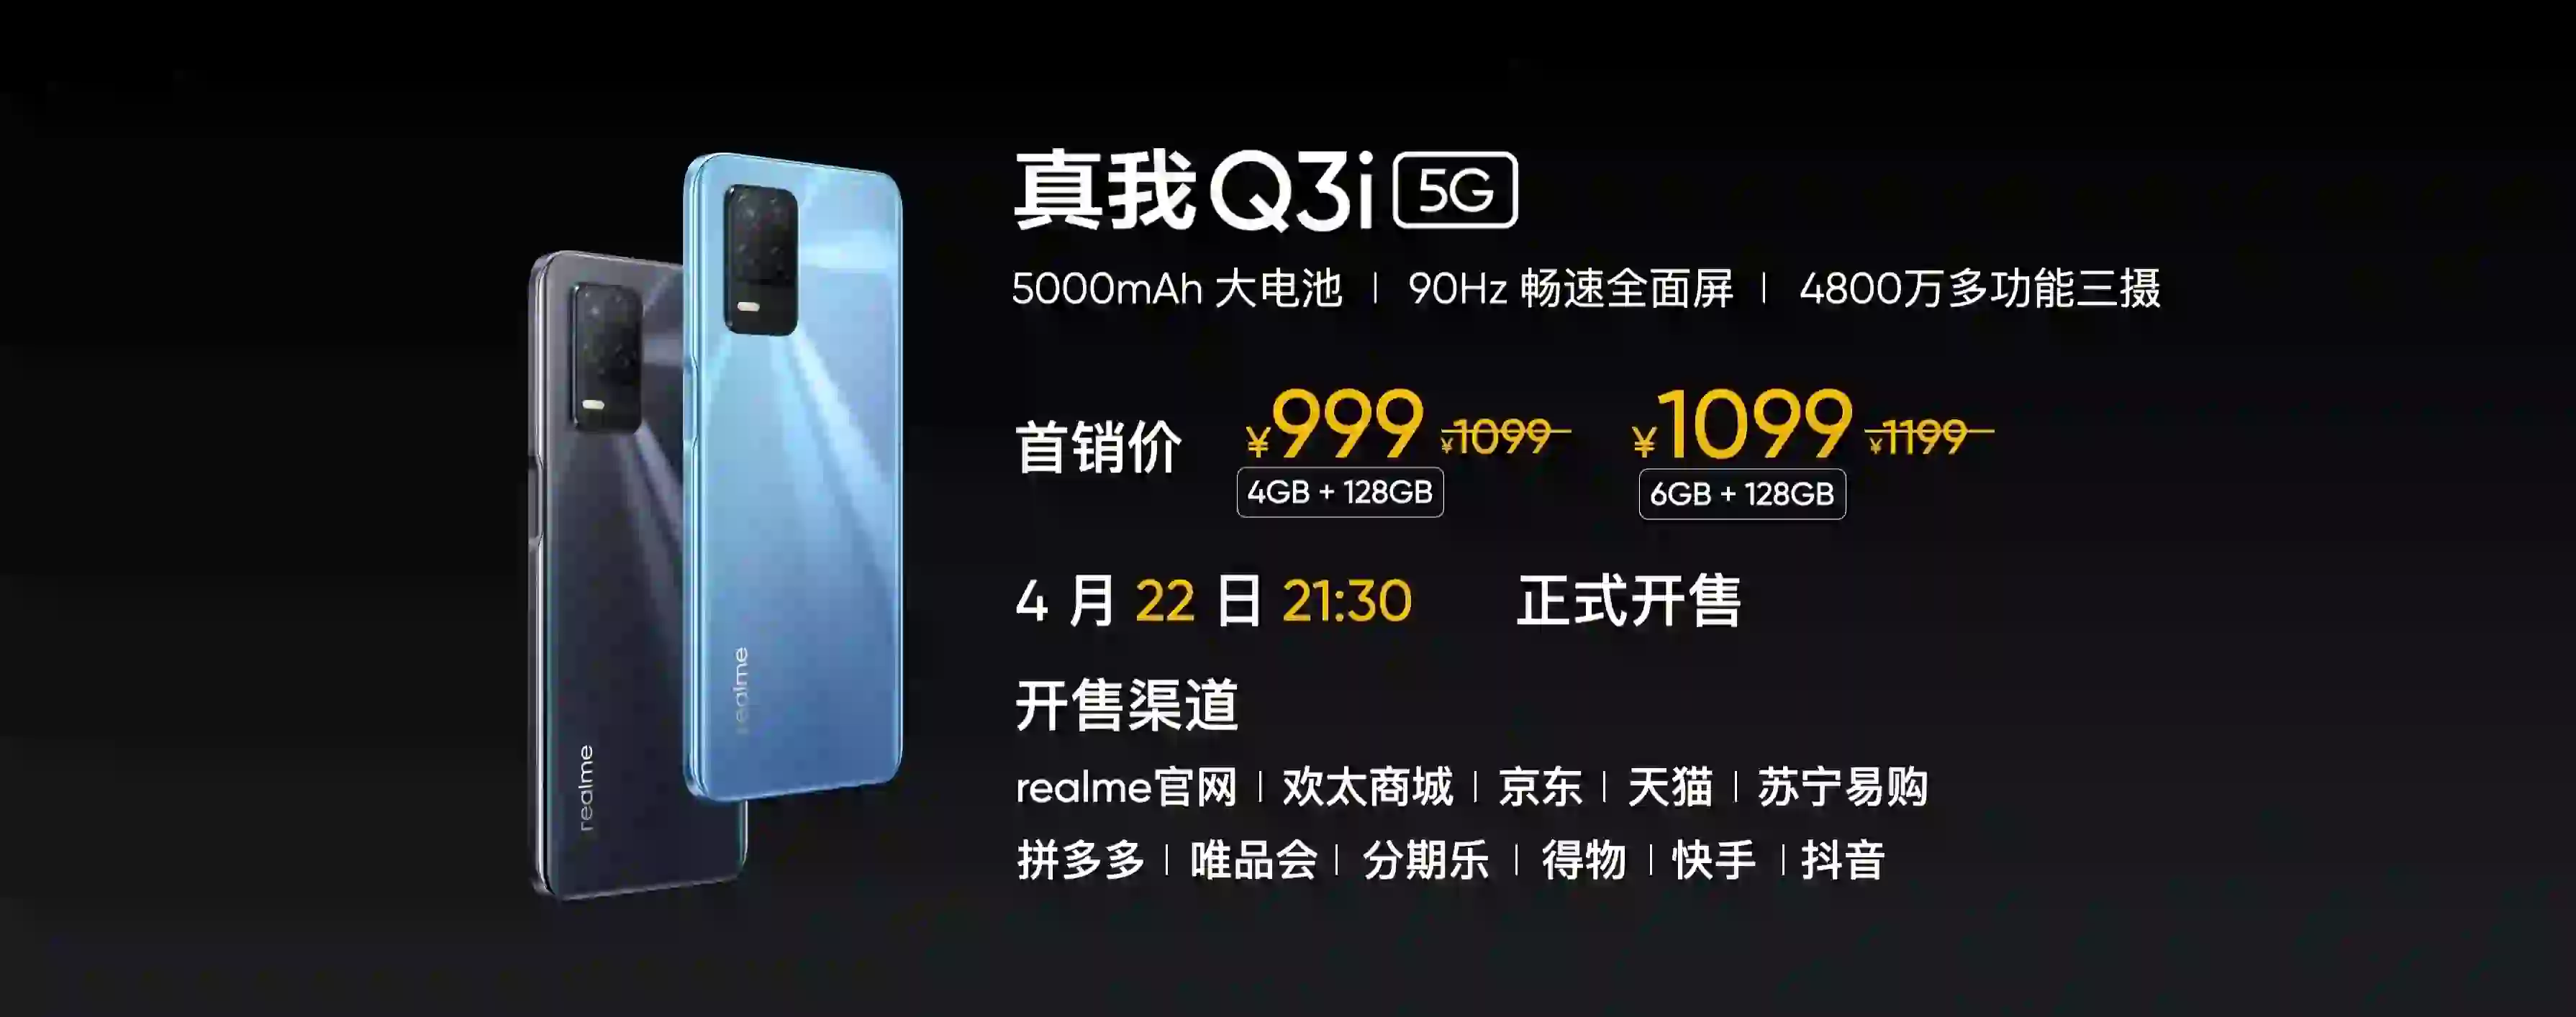 Realme Q3 series launched with 5G chipset and triple rear camera setup: Specs, Price